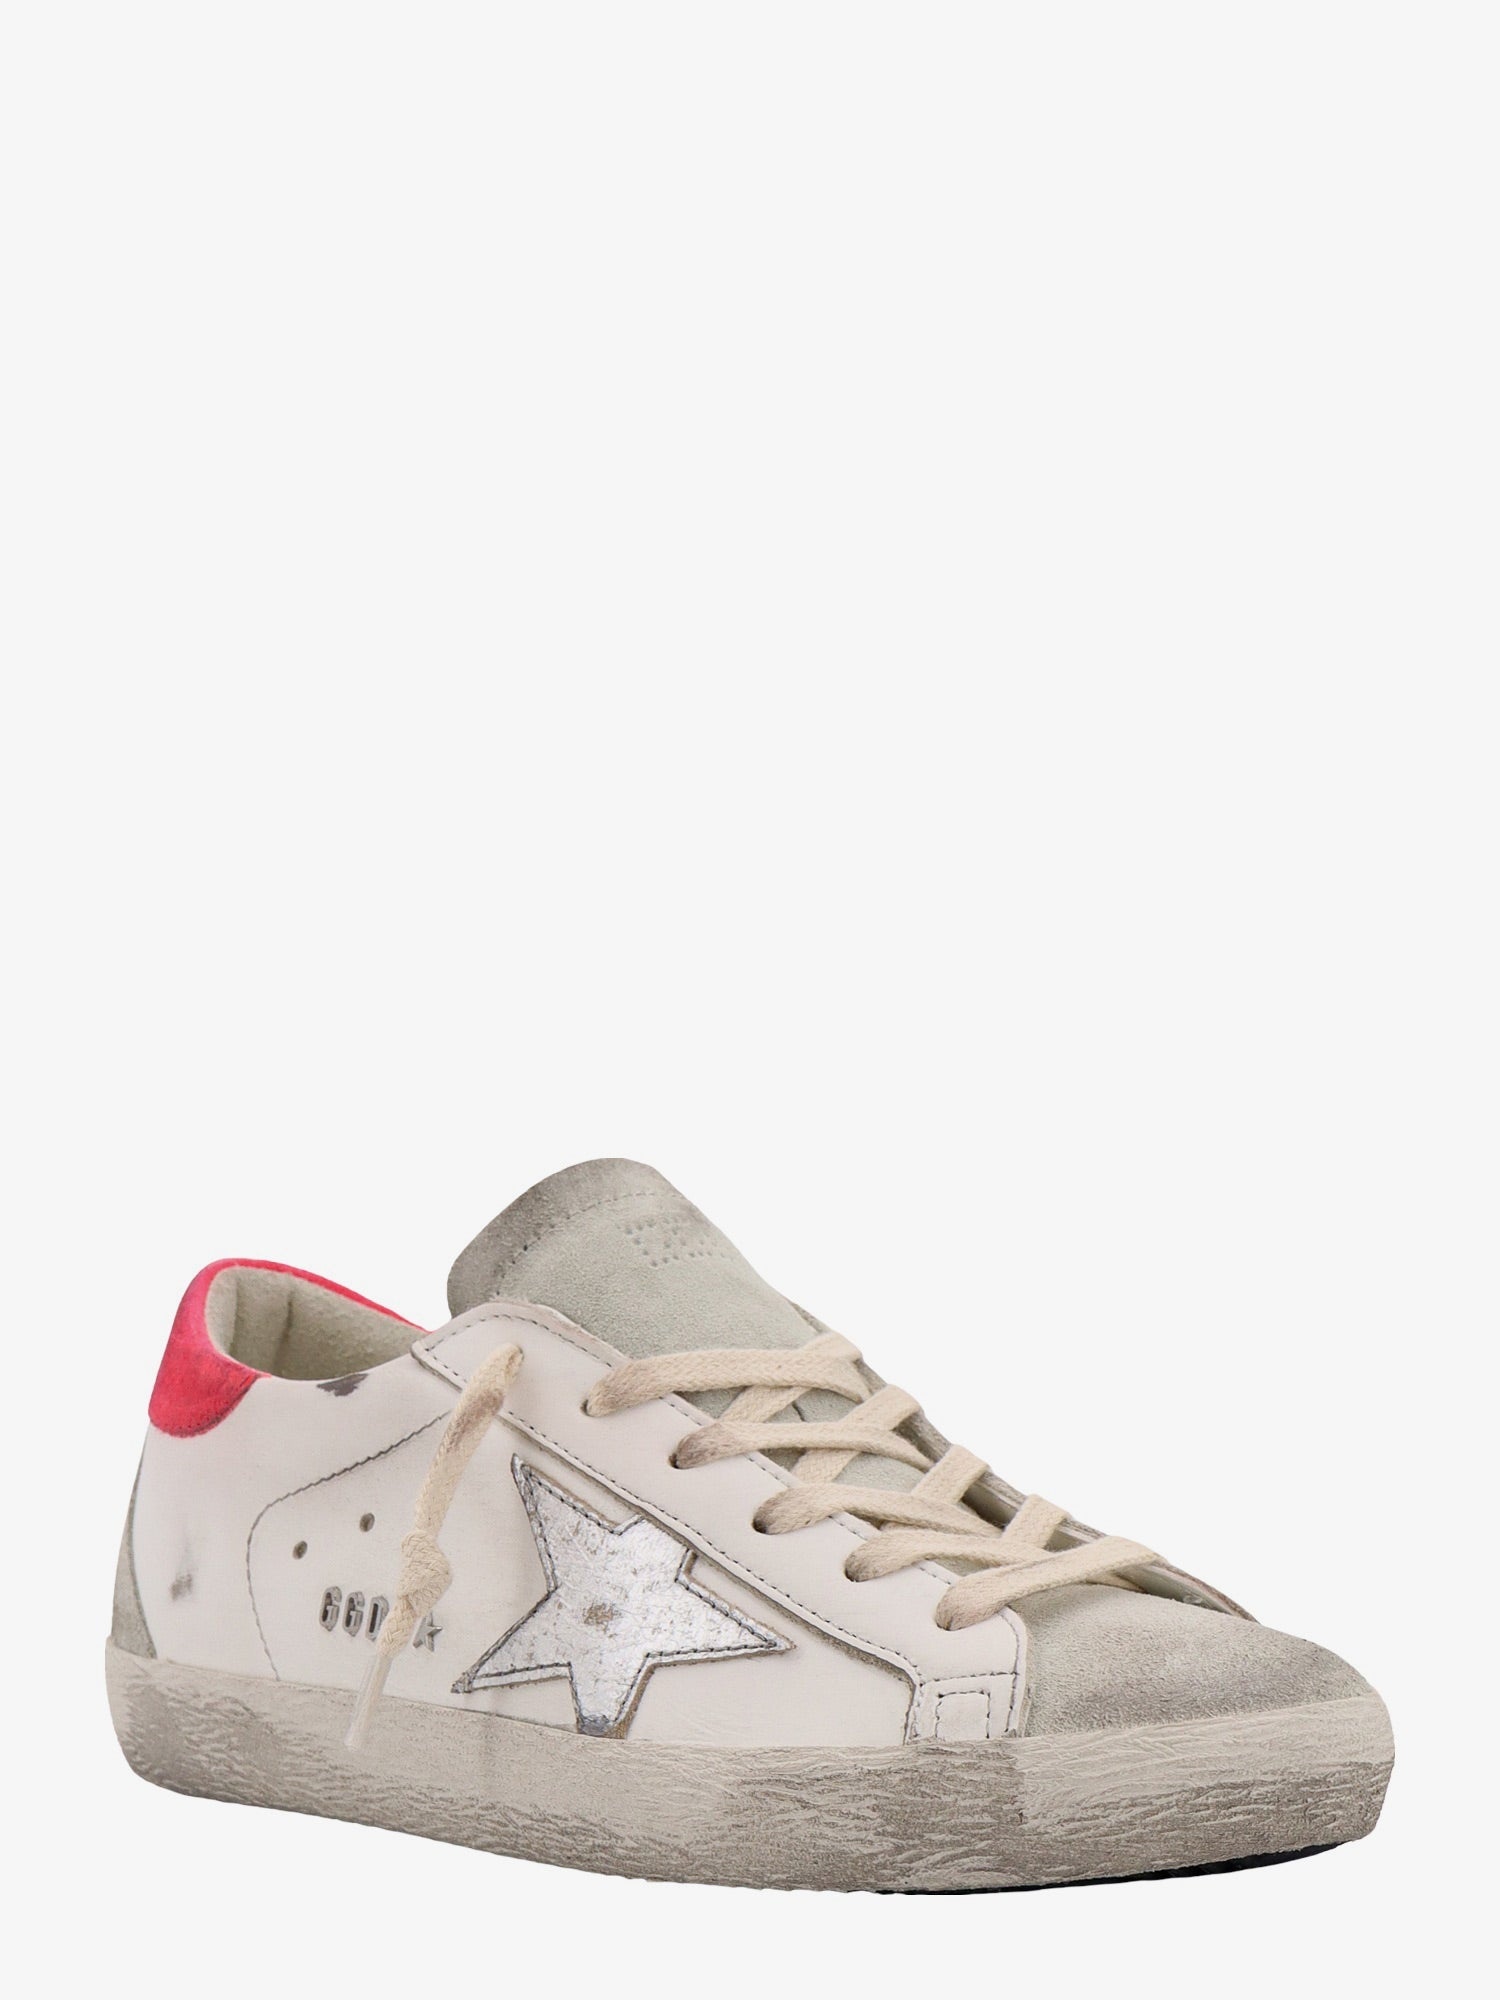 Golden Goose Deluxe Brand Woman Super-Star Woman White Sneakers - 2